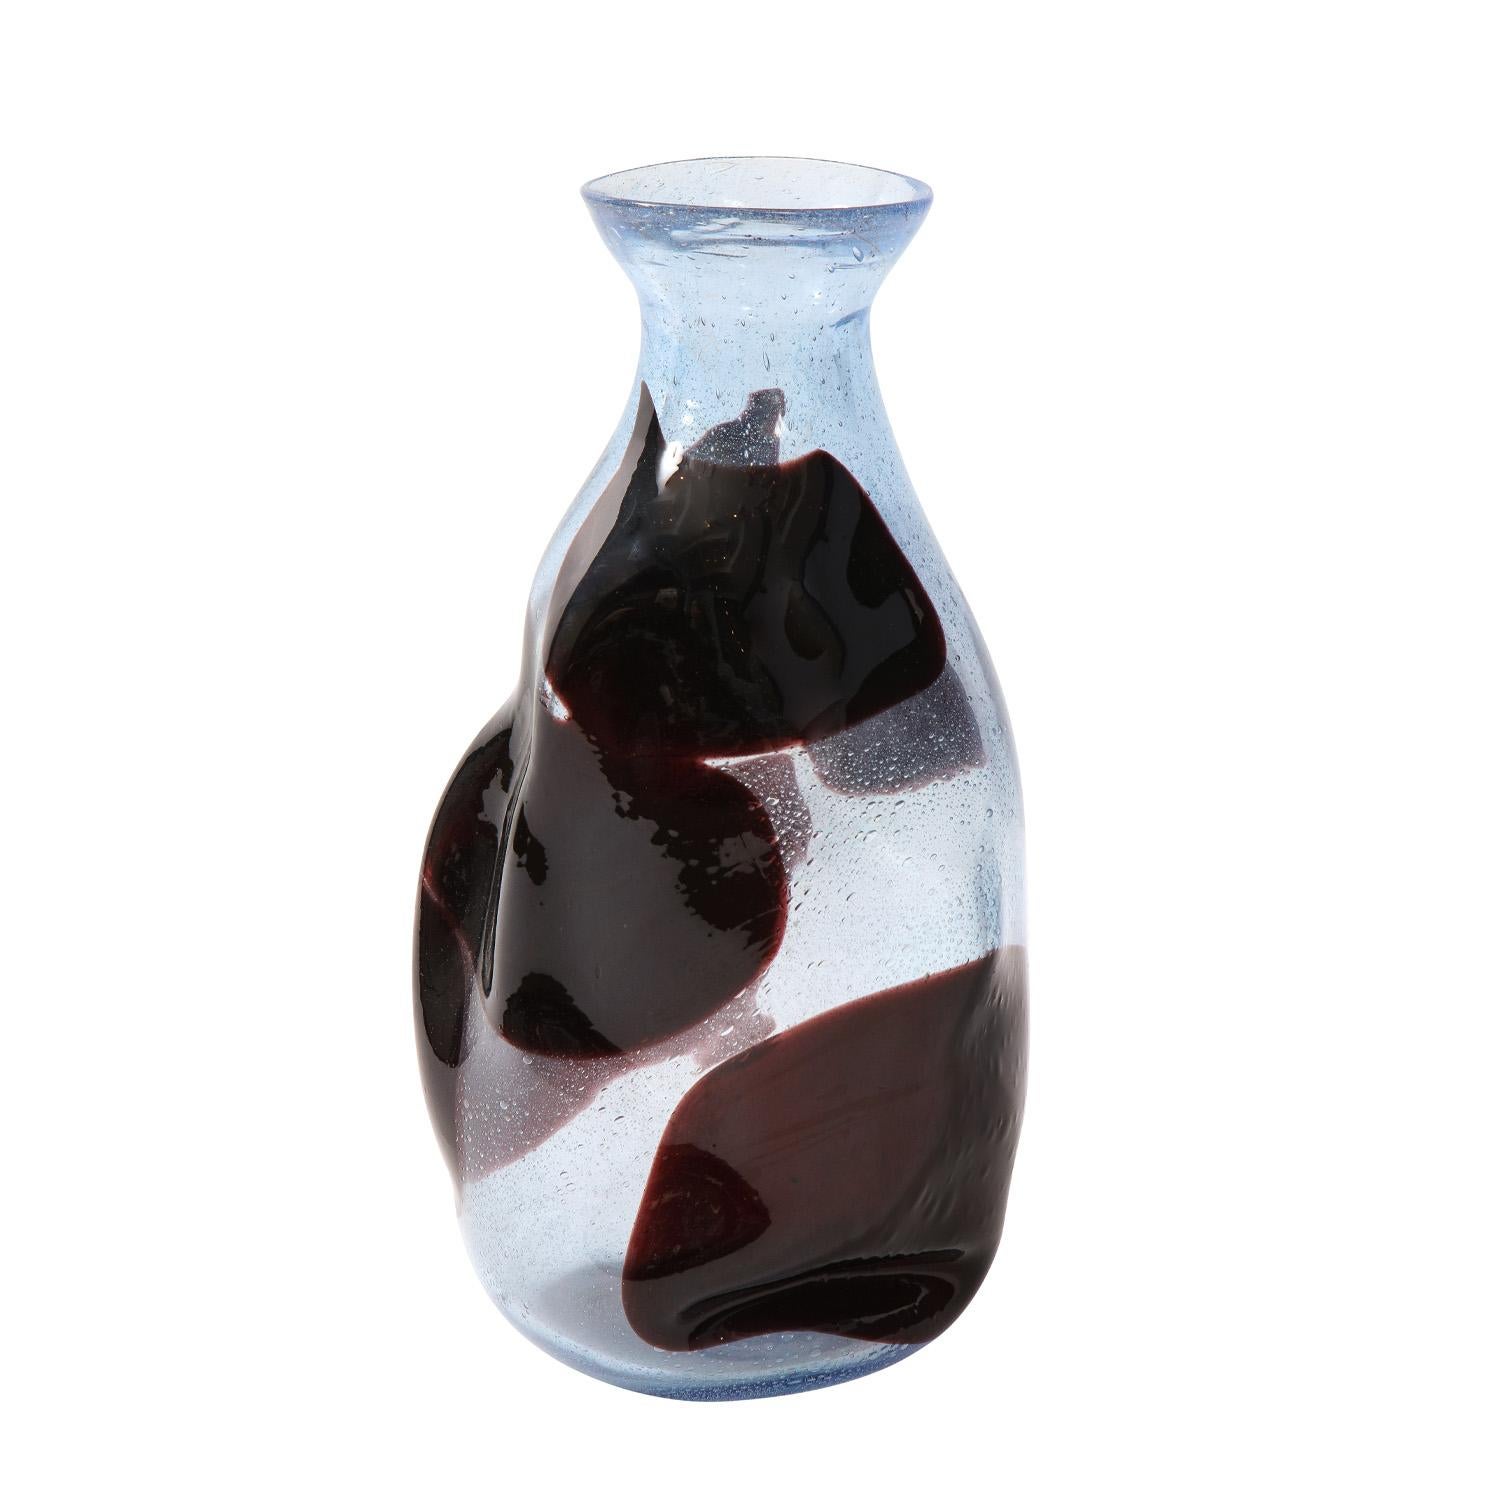 Rare and unique hand-blown glass vase, irregular form in pulegoso glass with spots, by Anzolo Fuga for A.V.E.M., Murano Italy 1960's. Fuga experimented with irregular shapes throughout his artistic career. 

Reference:
Anzolo Fuga Murano Glass